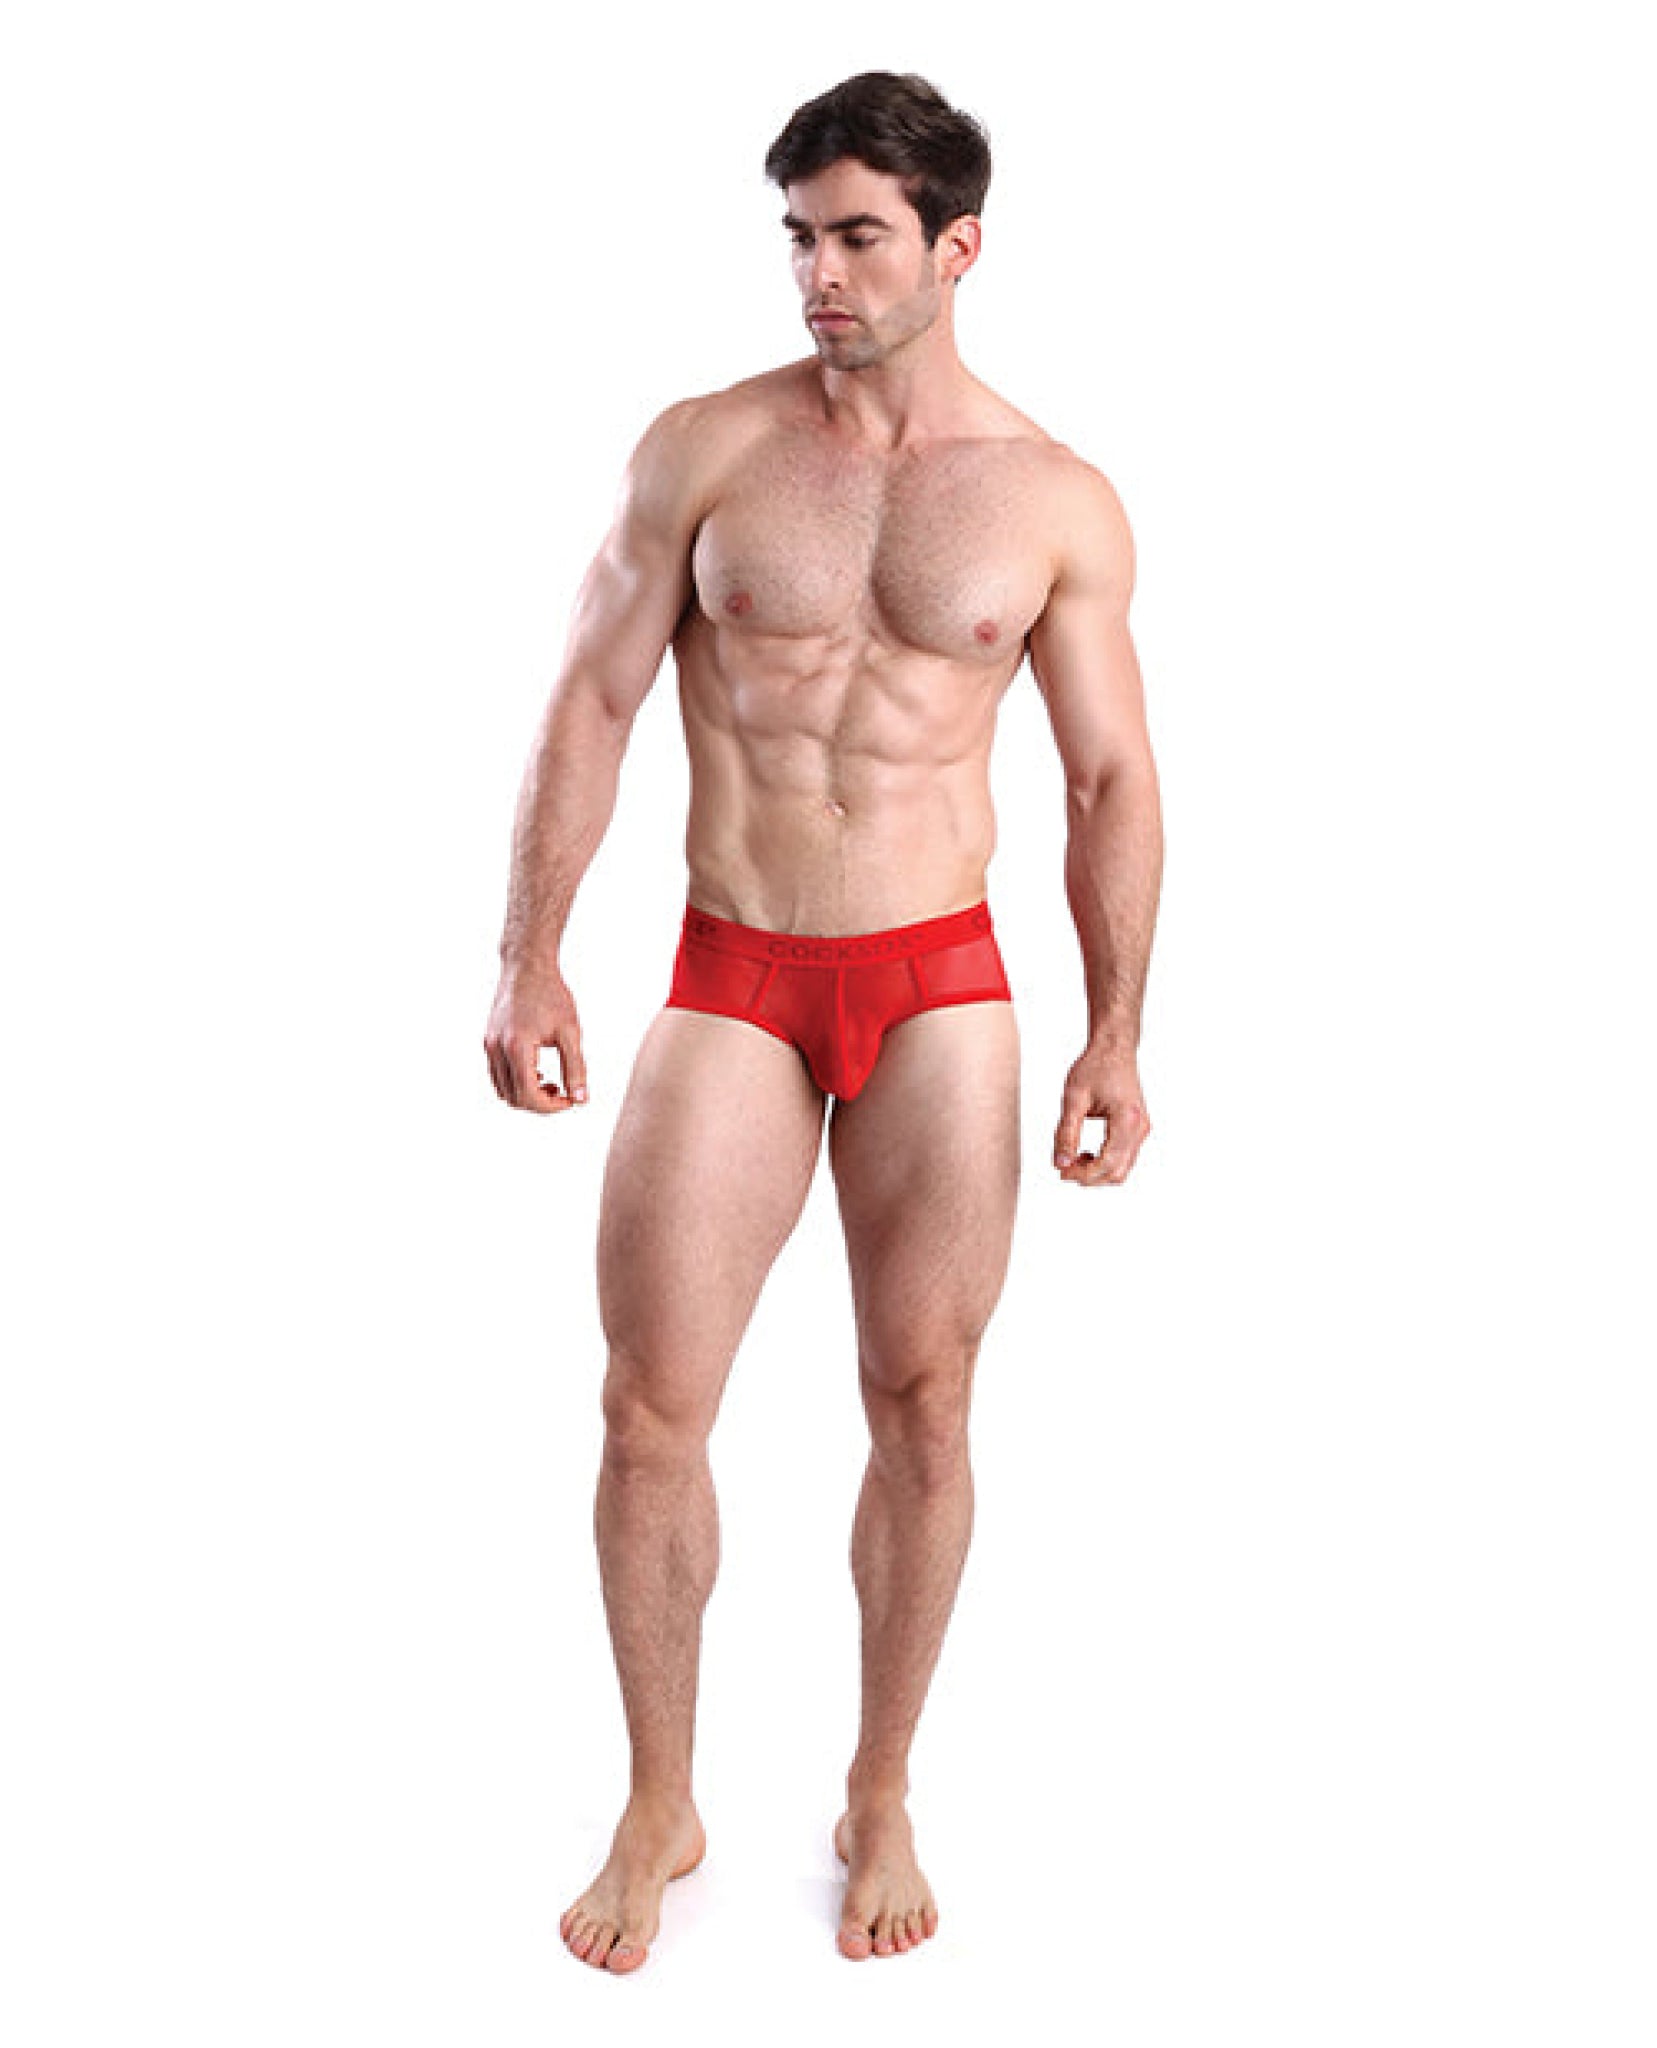 Cocksox Mesh Contour Pouch Sports Brief Fiery Red Cocksox